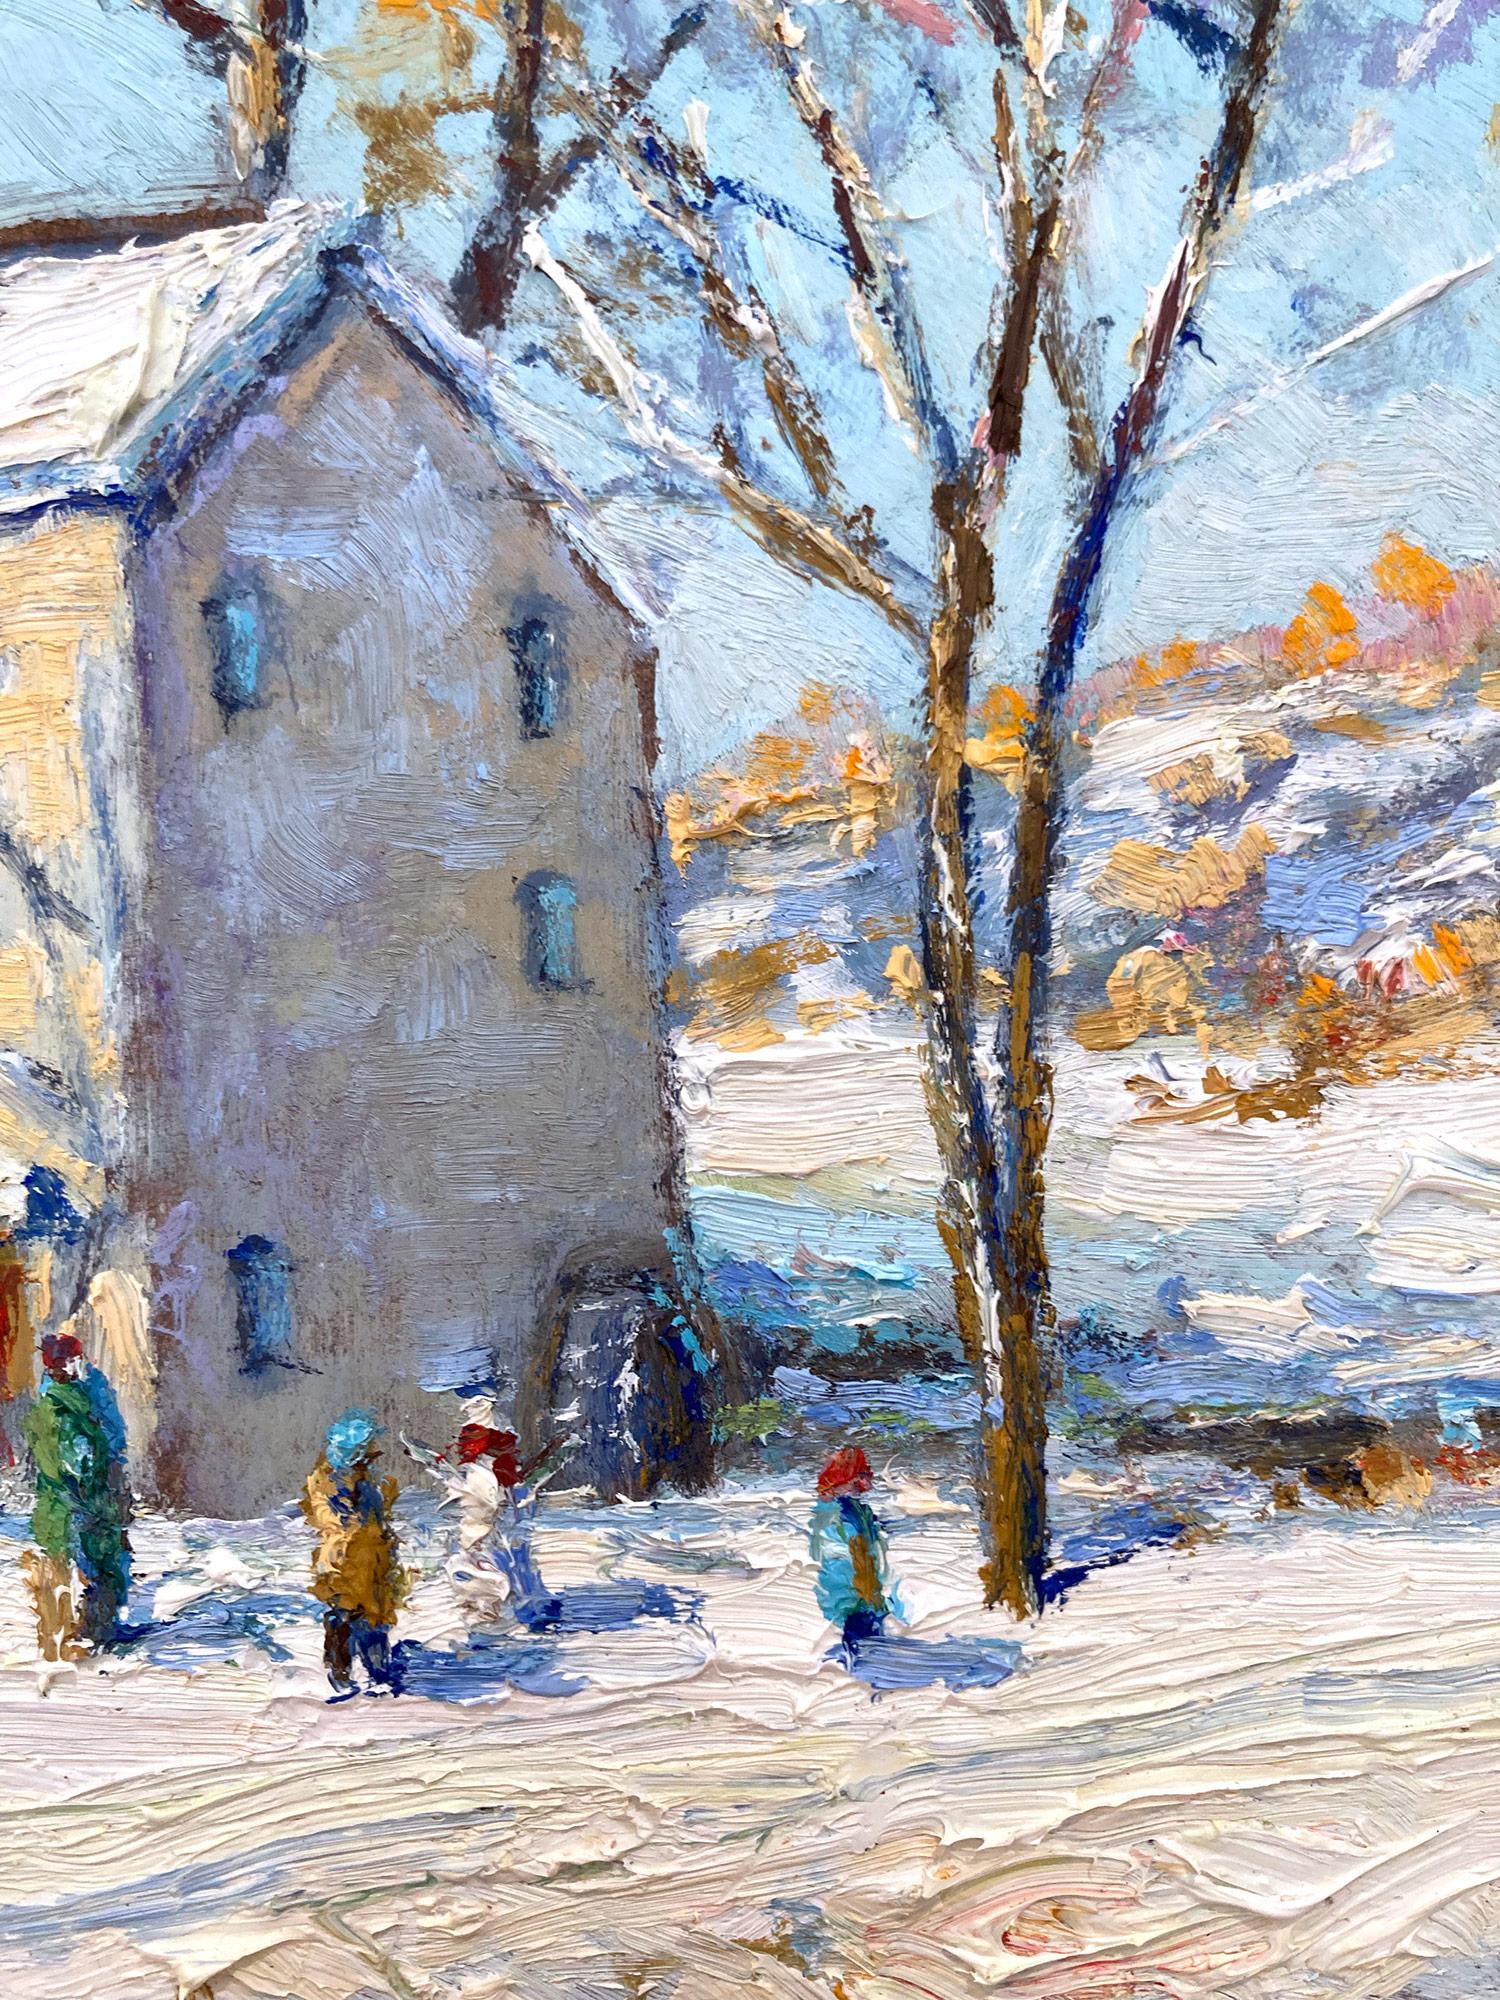 Impressionist winter pastoral scene of a quaint snow covered home with the grandchildren playing in the snow accompanied by their Grandmother in Bucks County, PA. Willett has portrayed this charming scene in a most intimate, yet energetic way, and